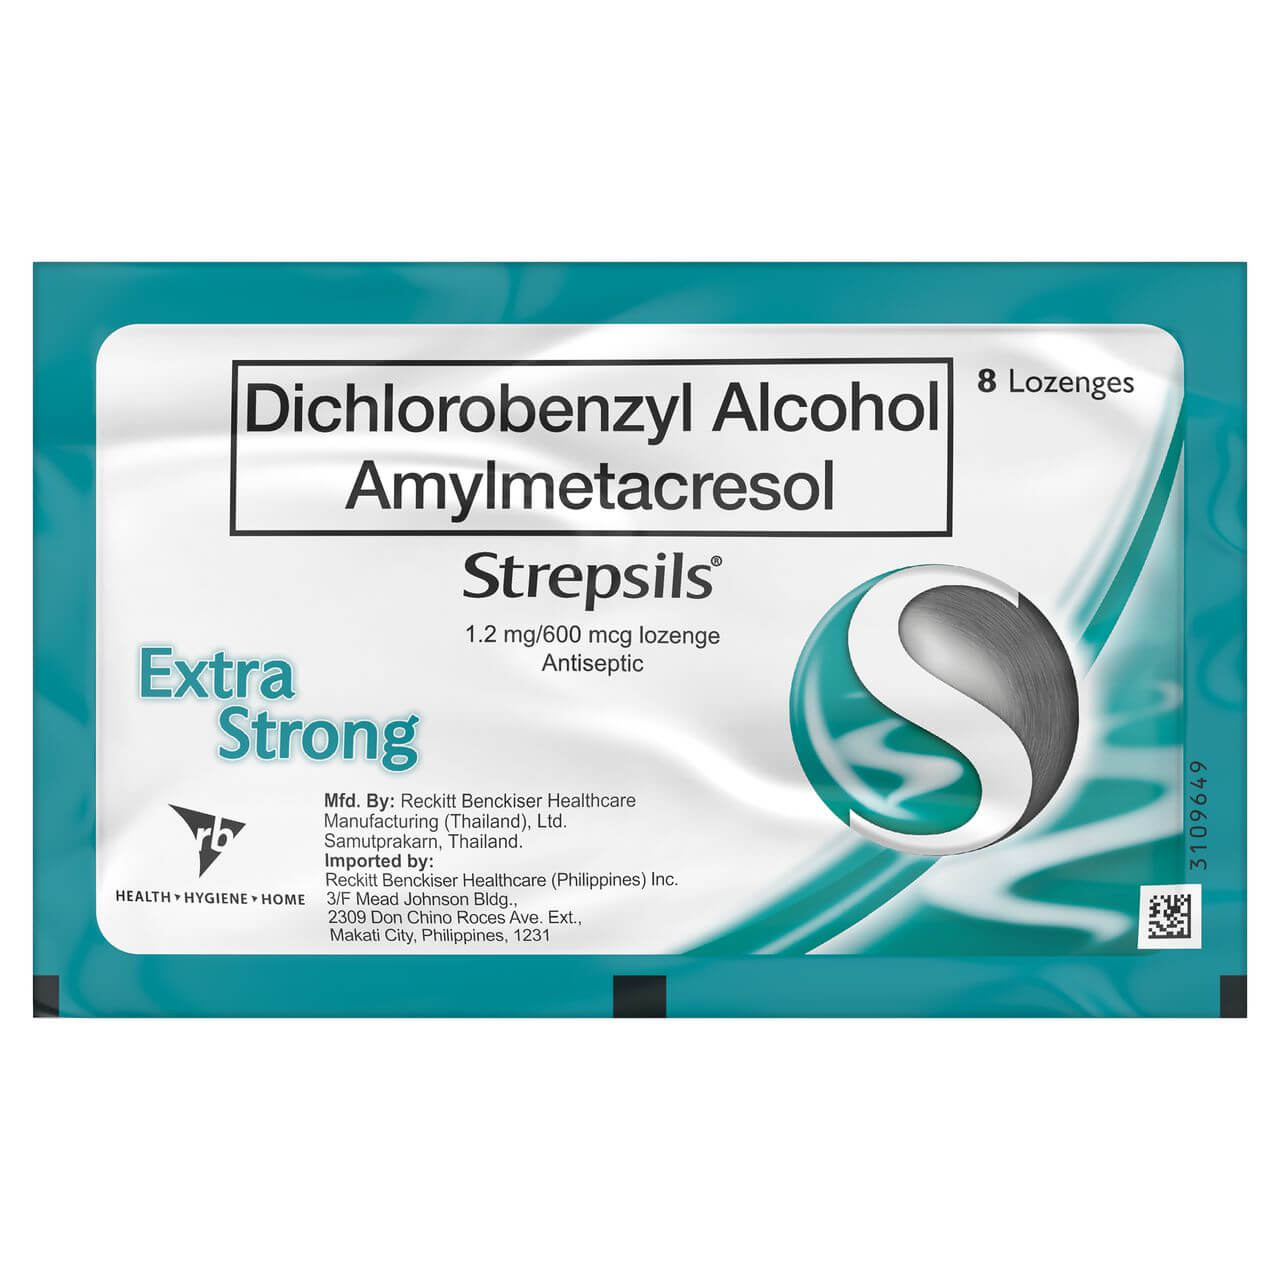 Strepsils Extra Strong